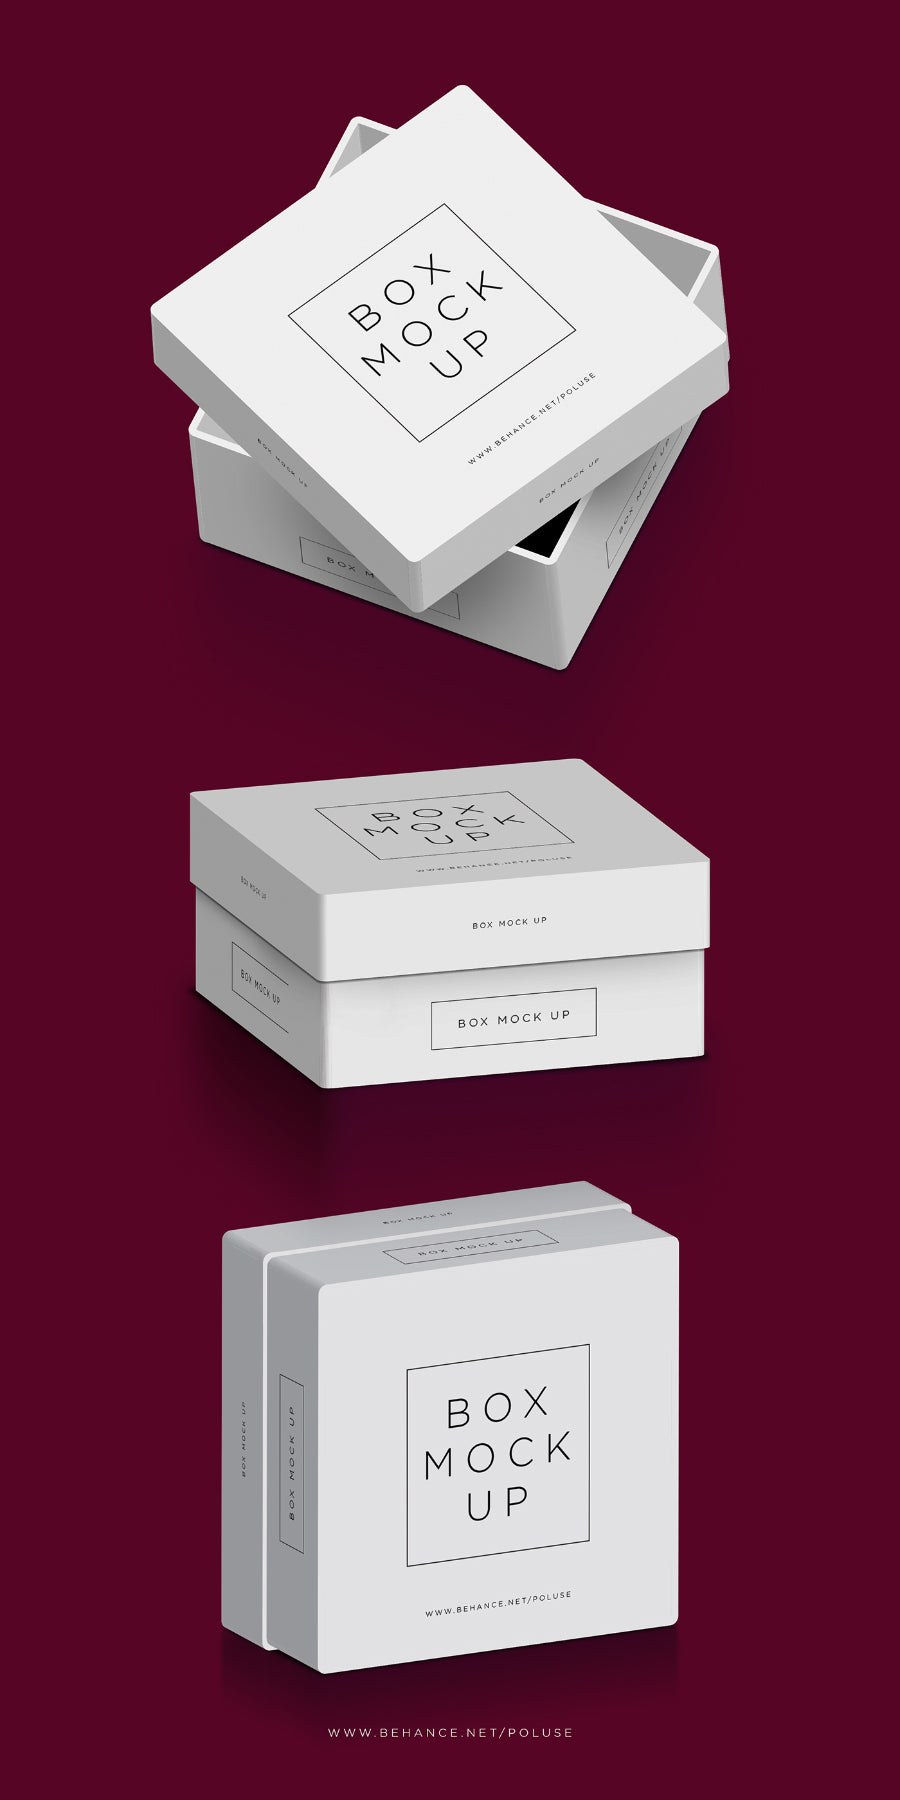 Download Free Packaging Mockups | Free Psd Mockup Templates Page 2 ...